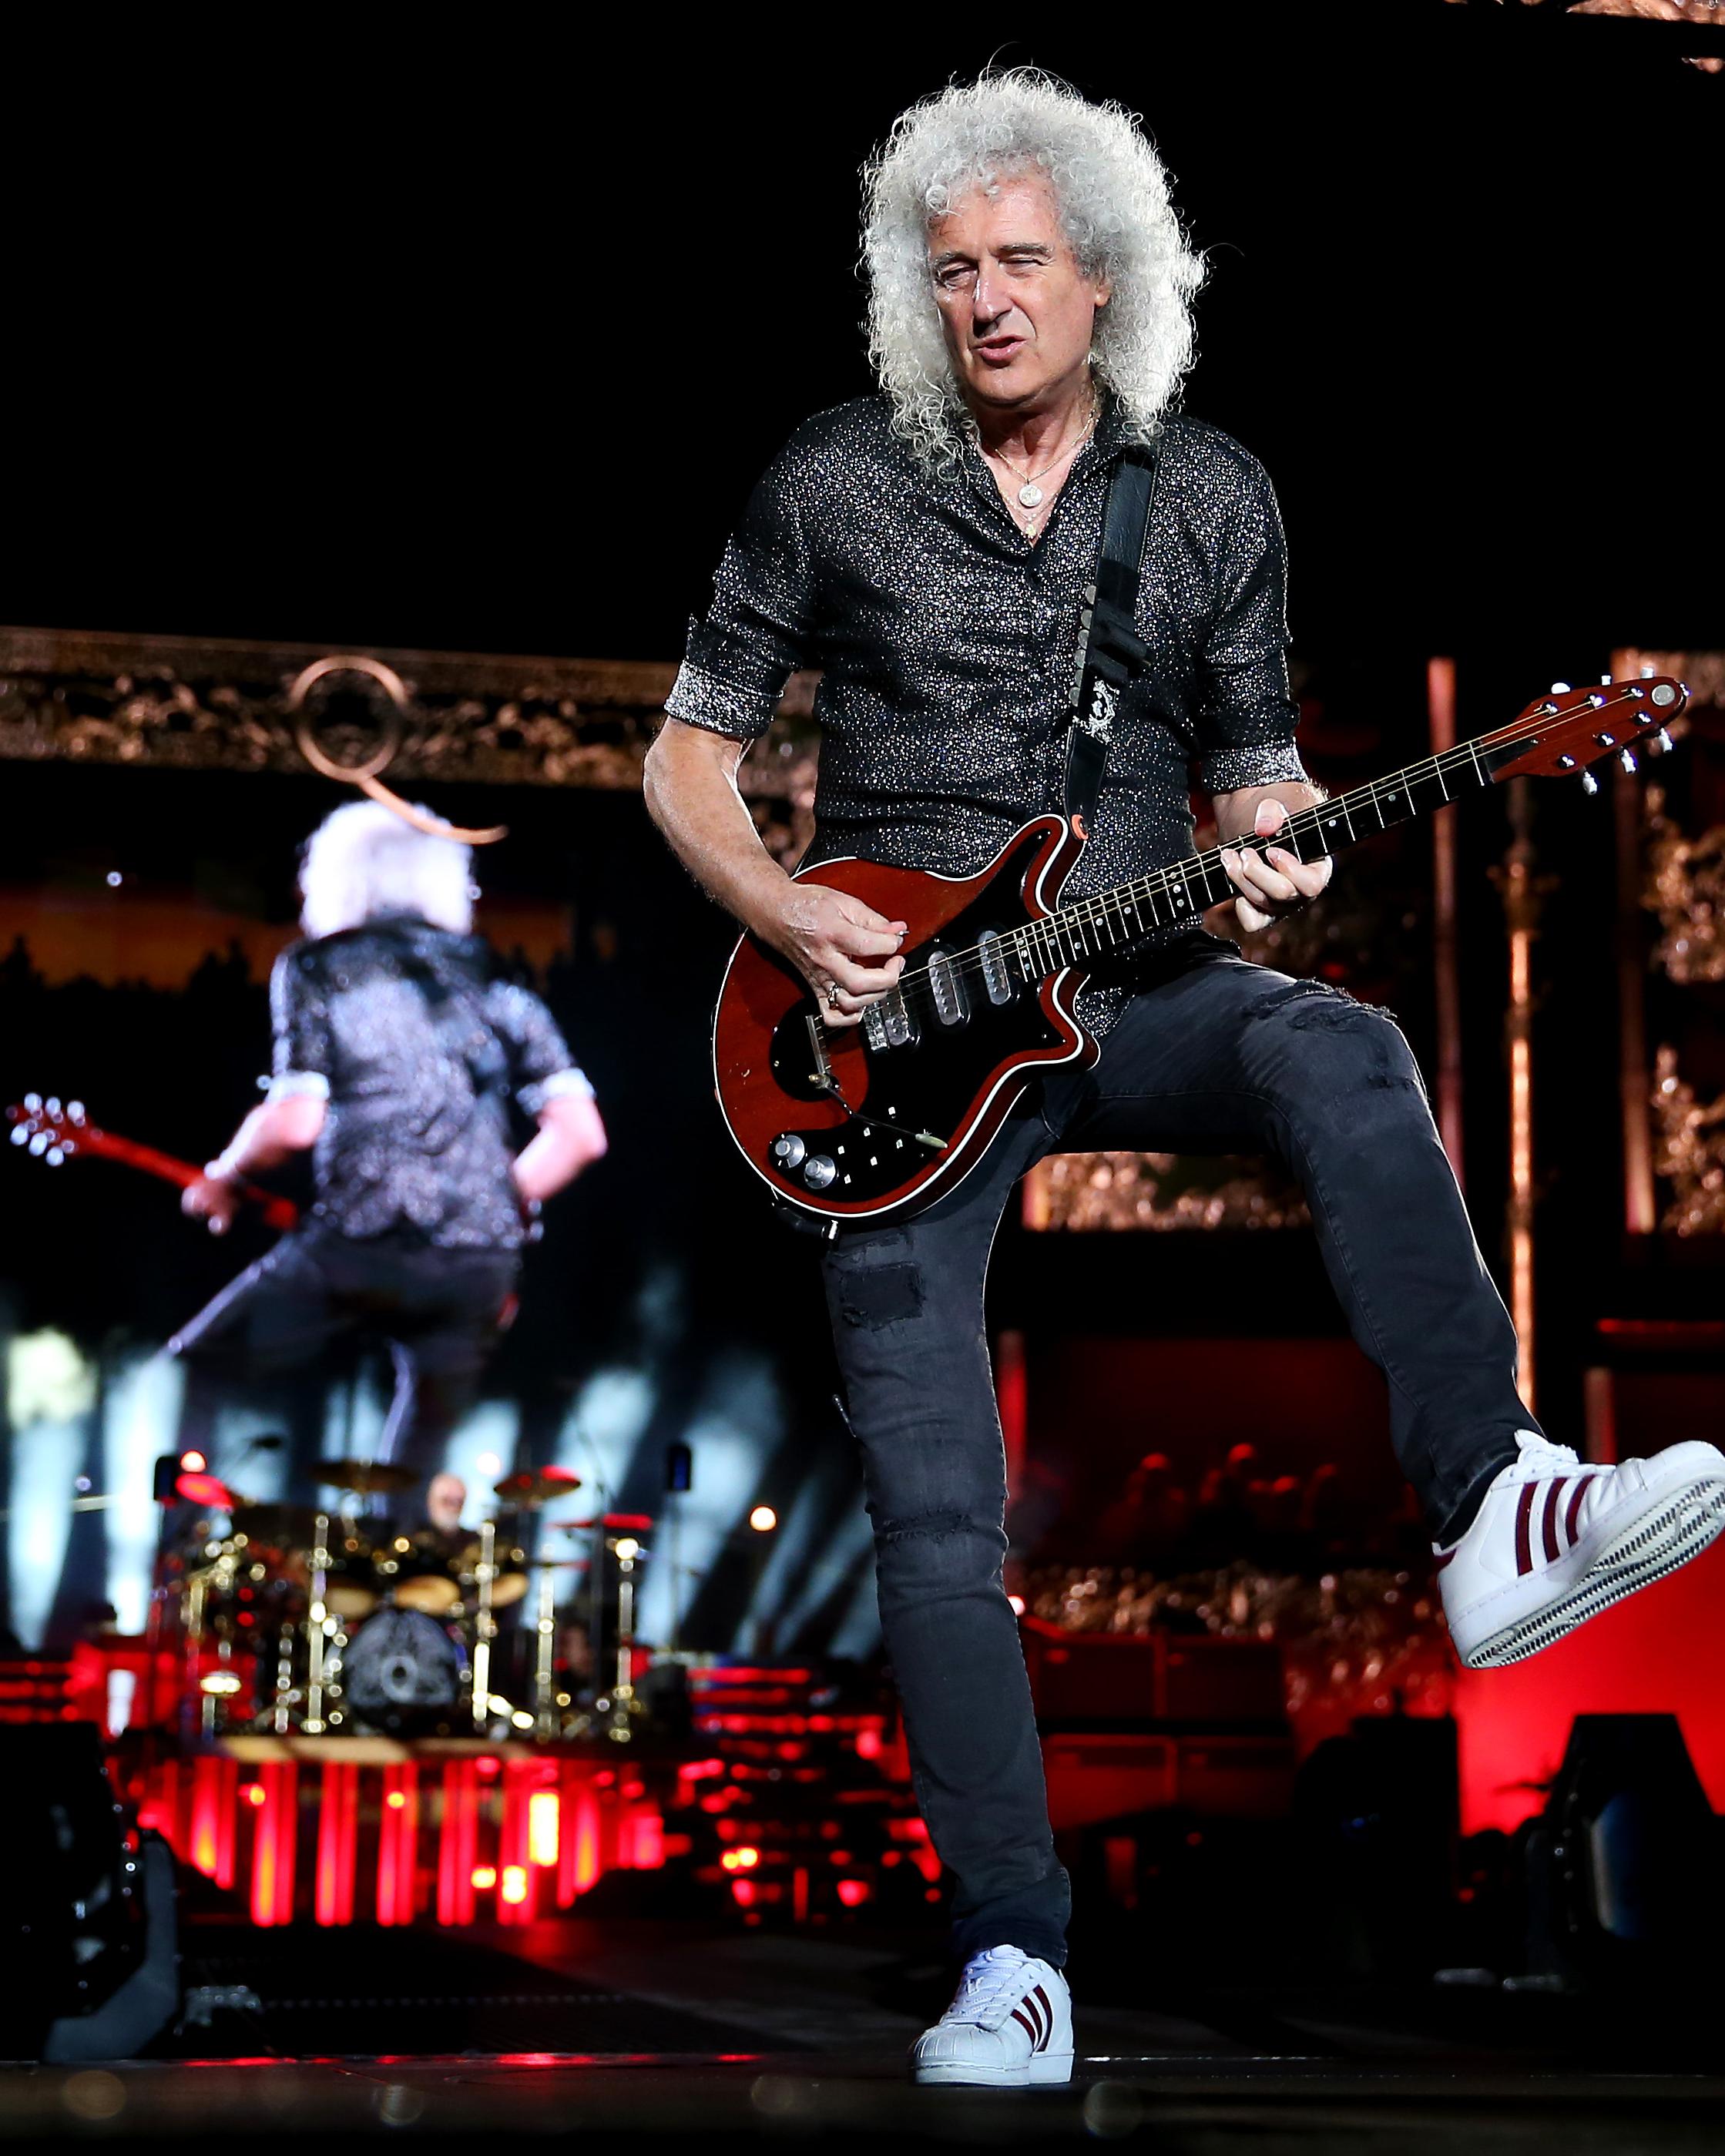 Brian May - $210 Million Net Worth, Queen's Clever One